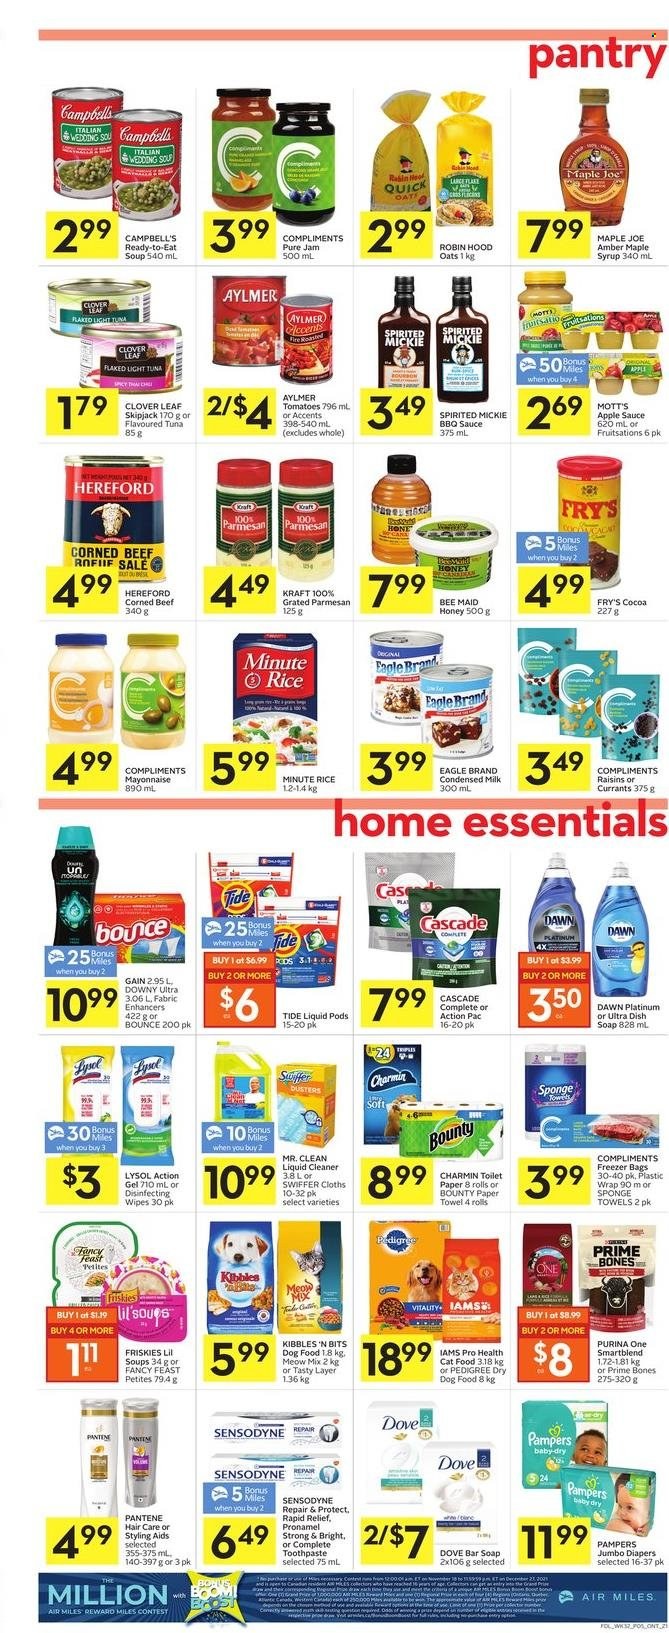 thumbnail - Foodland Flyer - December 02, 2021 - December 08, 2021 - Sales products - tomatoes, Mott's, Campbell's, soup, sauce, Kraft®, corned beef, parmesan, Clover, milk, condensed milk, mayonnaise, Bounty, cocoa, oats, light tuna, rice, BBQ sauce, apple sauce, maple syrup, honey, fruit jam, syrup, currants, beef meat, Dove, Pampers, Pantene, Sensodyne. Page 5.